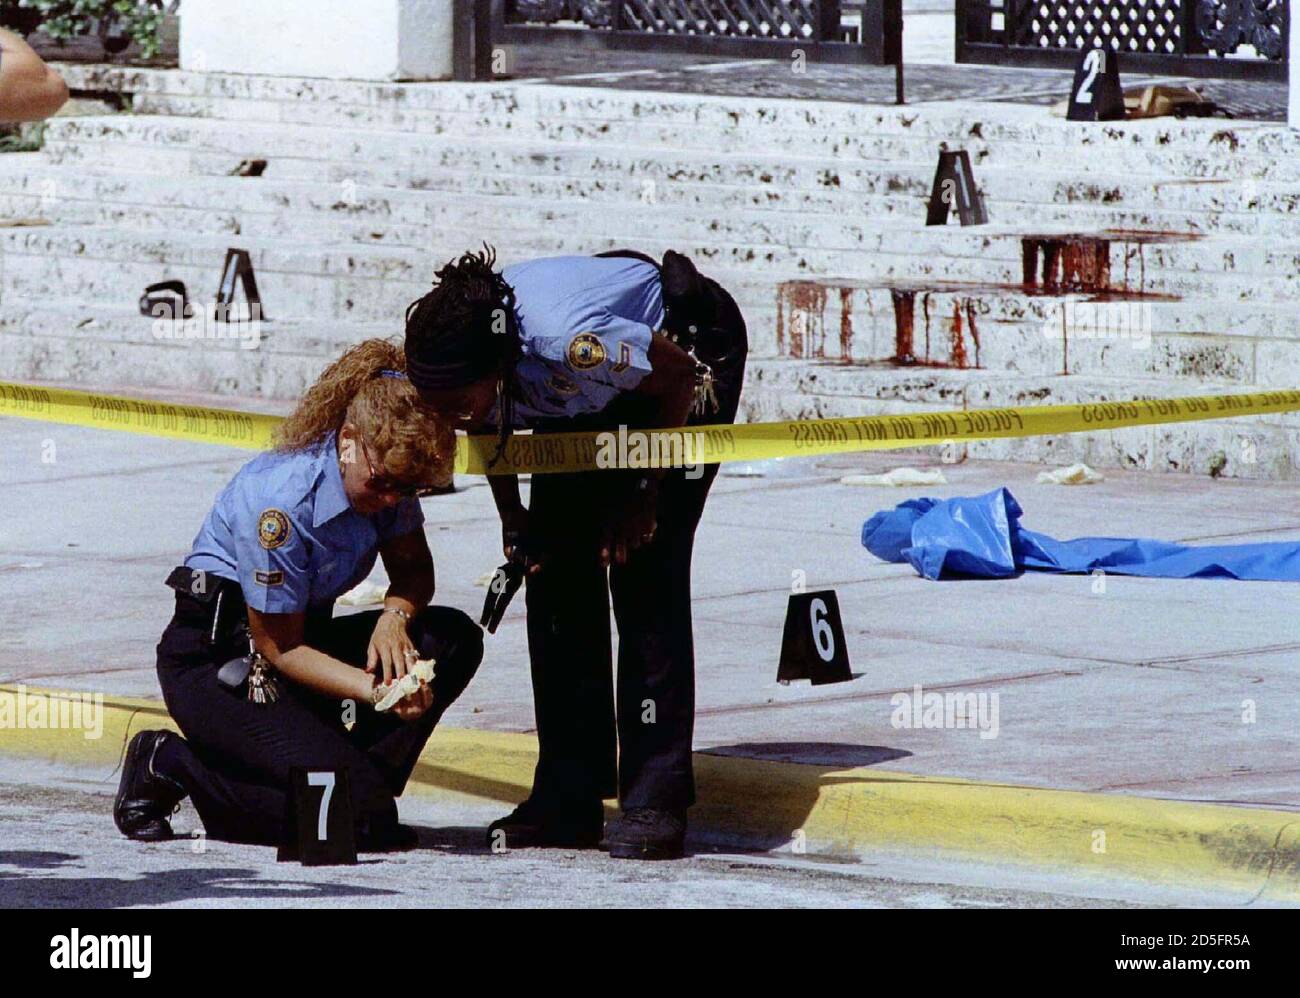 With The Blood Stained Steps Of Fashion Designer Gianni Versace Miami Beach Mansion In The Background Police Investigators Look For Evidence At The Murder Scene Of Versace July 15 Versace Was Shot Twice